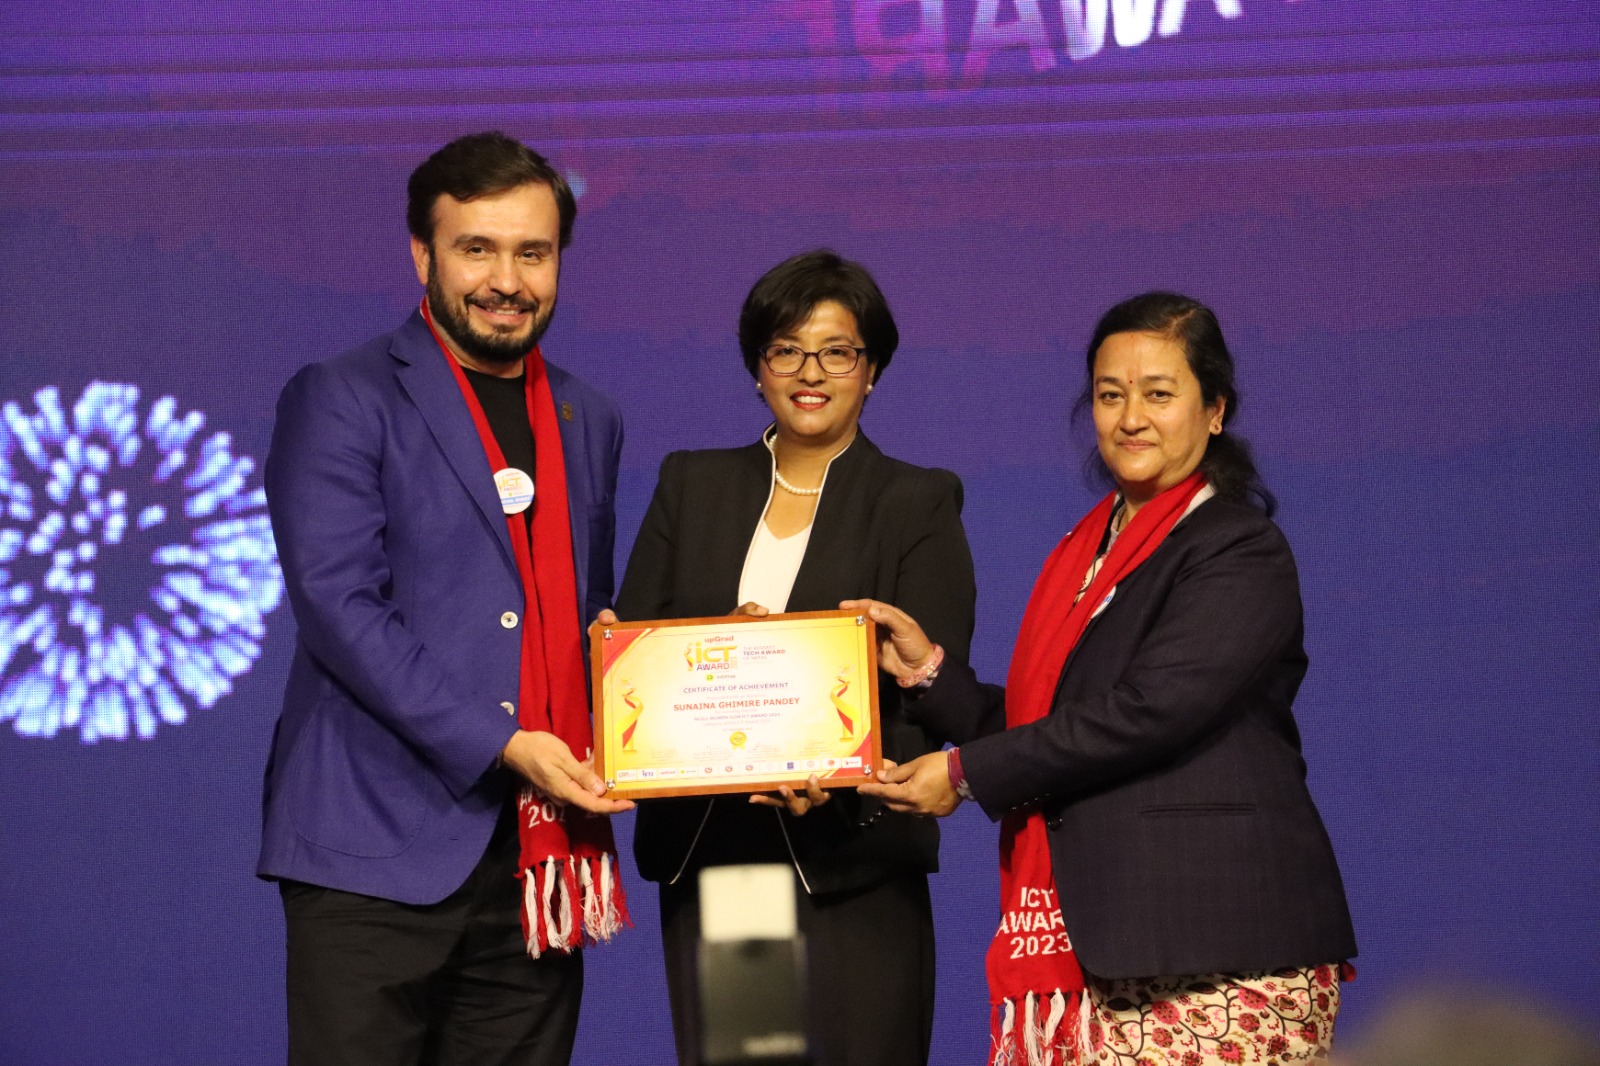 Ncell honours Sunaina Ghimire Pandey with ‘Ncell Woman ICON ICT Award 2023’